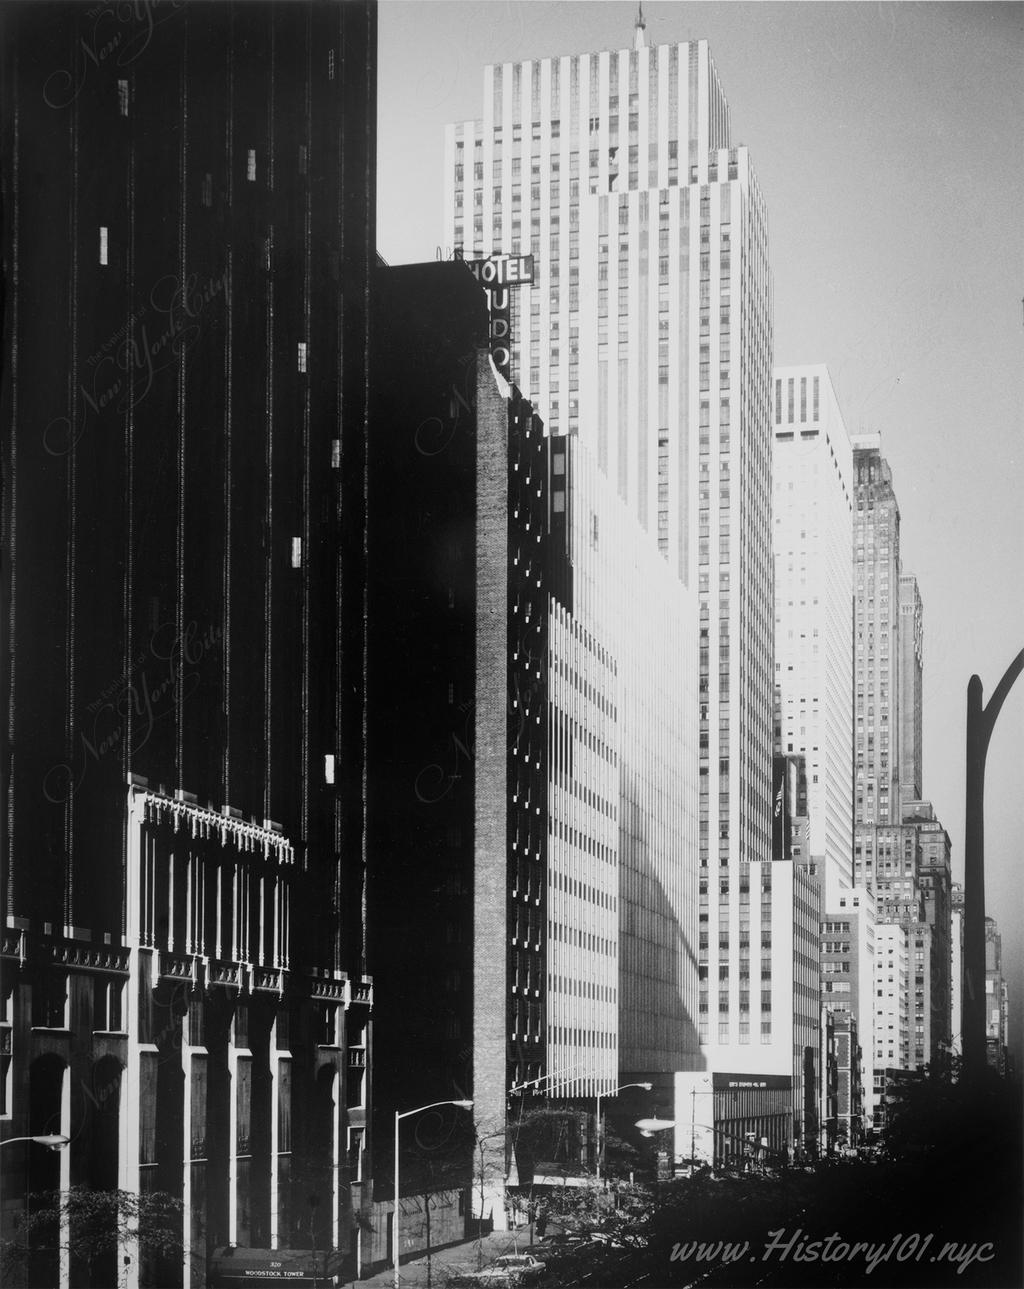 Photograph of the Daily News Building, located at 220-226 East 42nd Street, Manhattan.